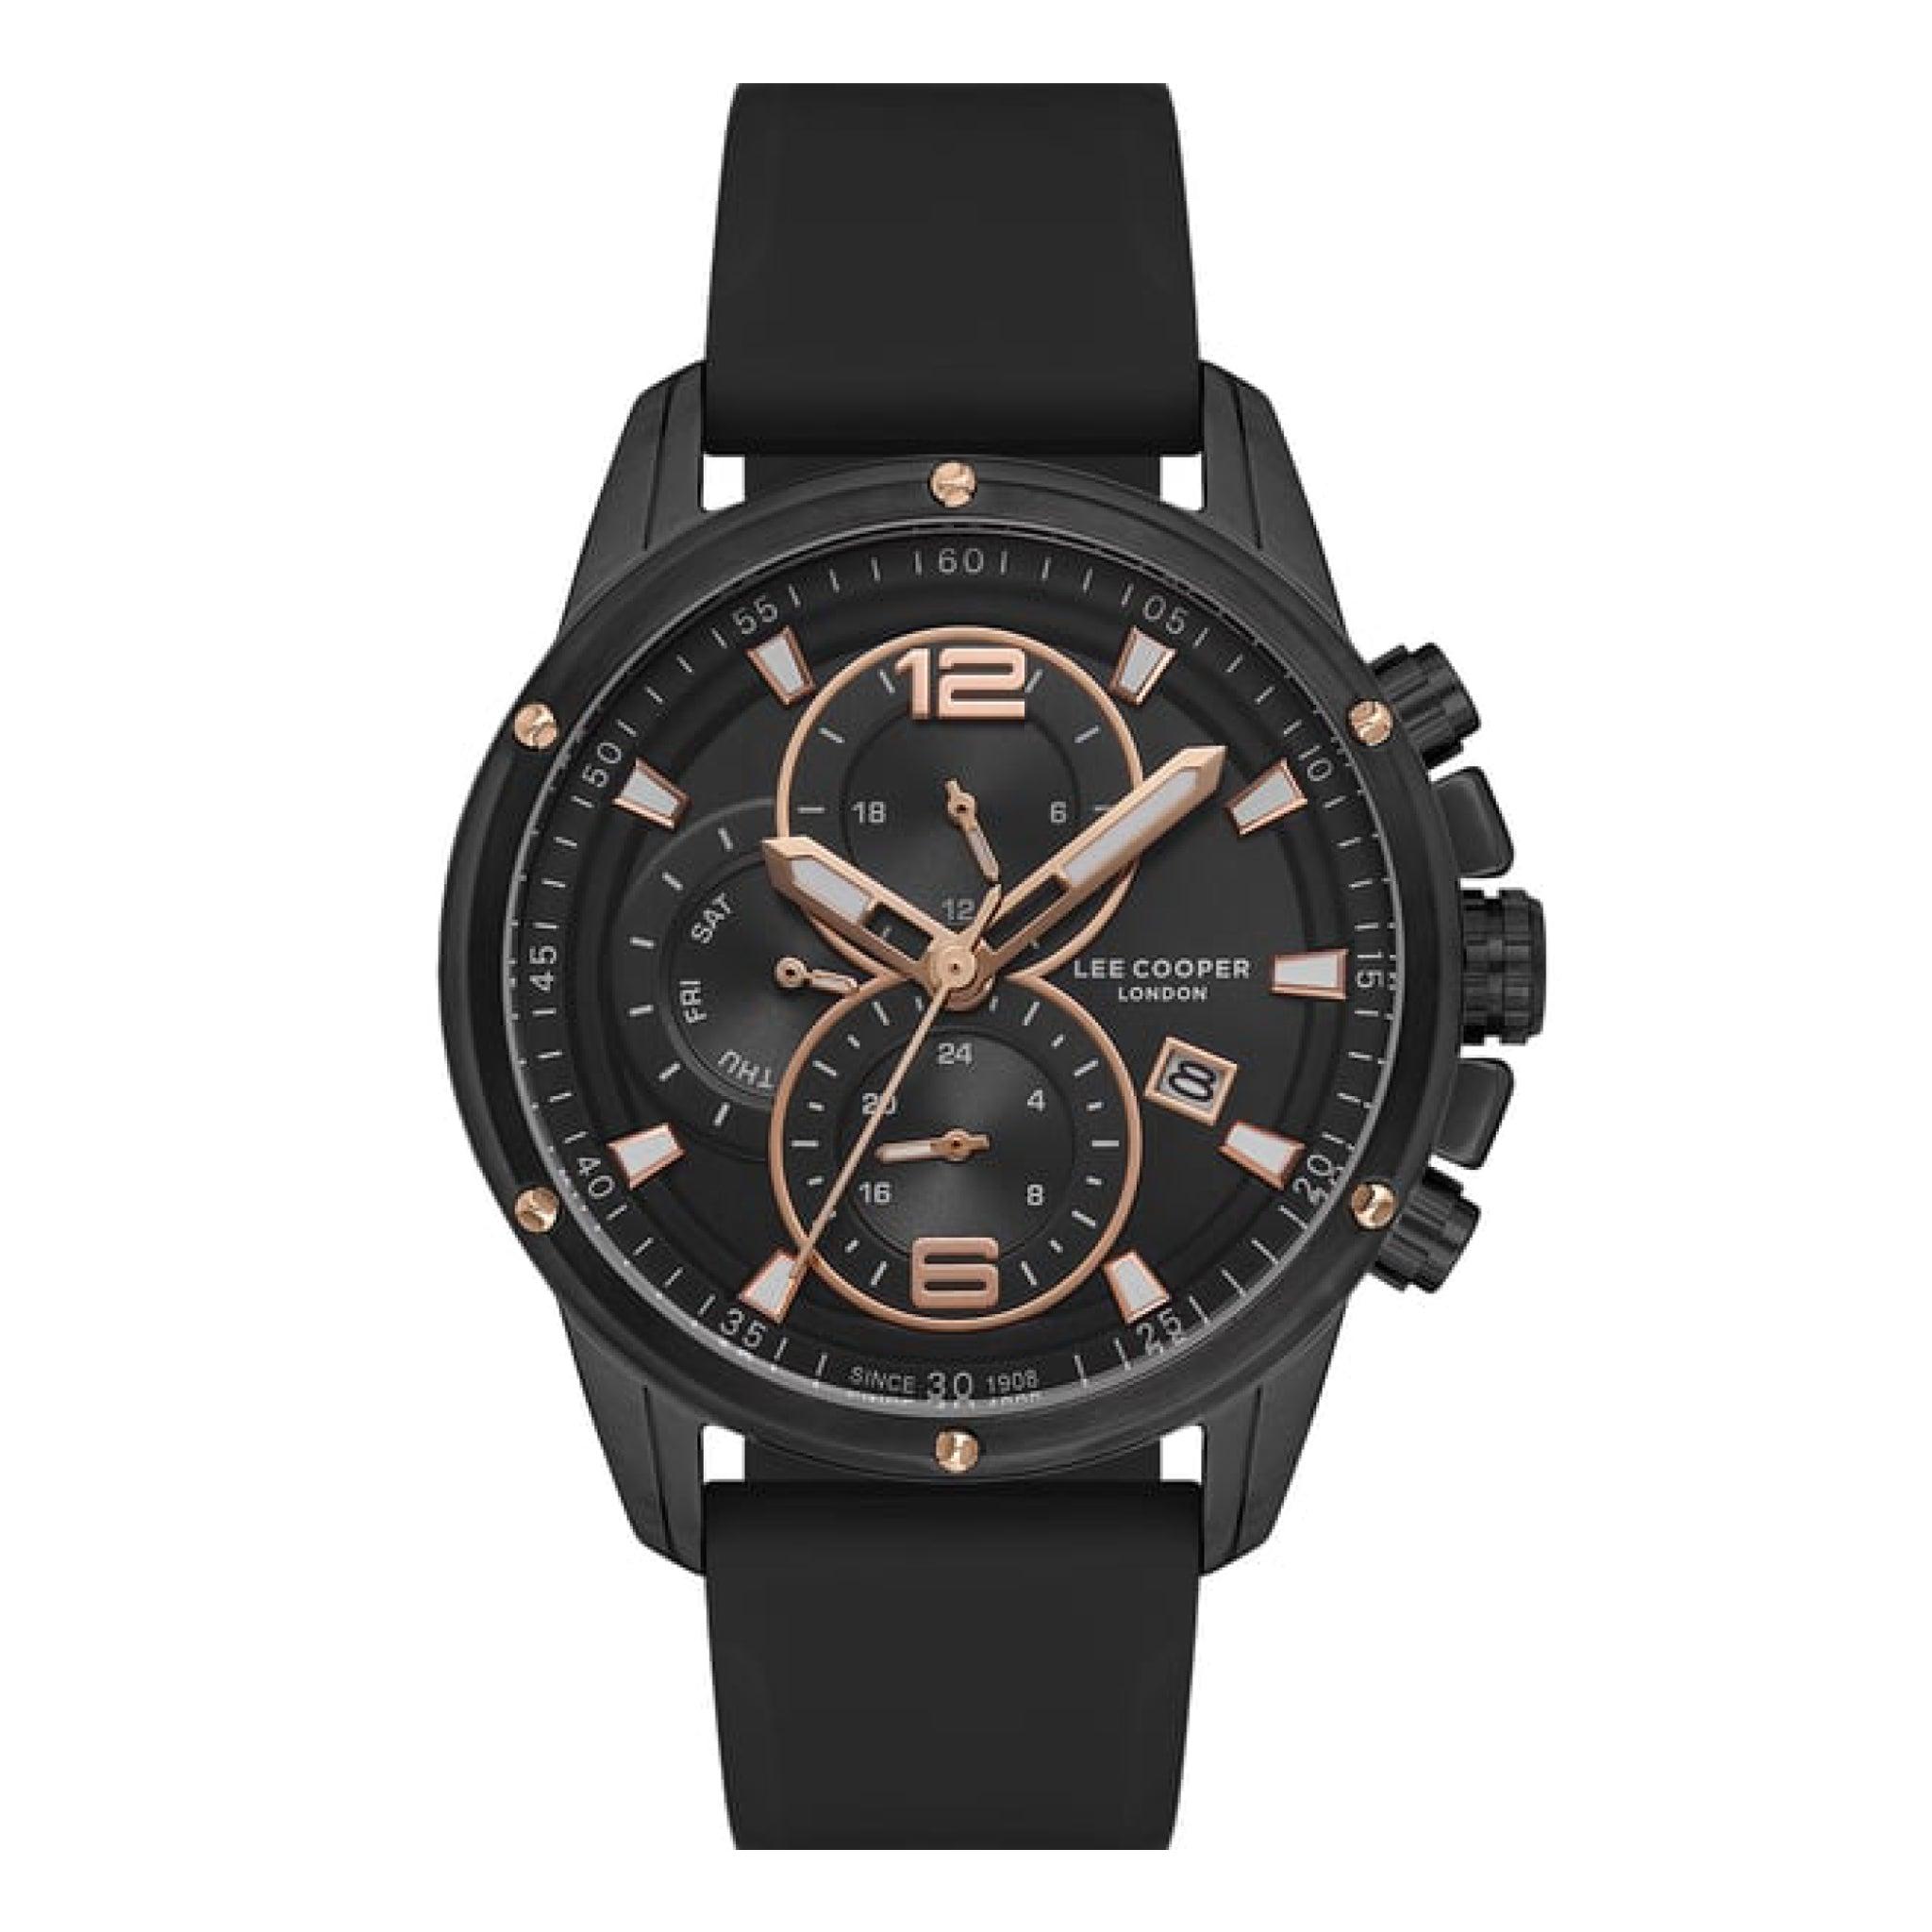 Lee Cooper, Lc07423.651, Men's Analog Watch, Smoky Dial, Black Rubber Band